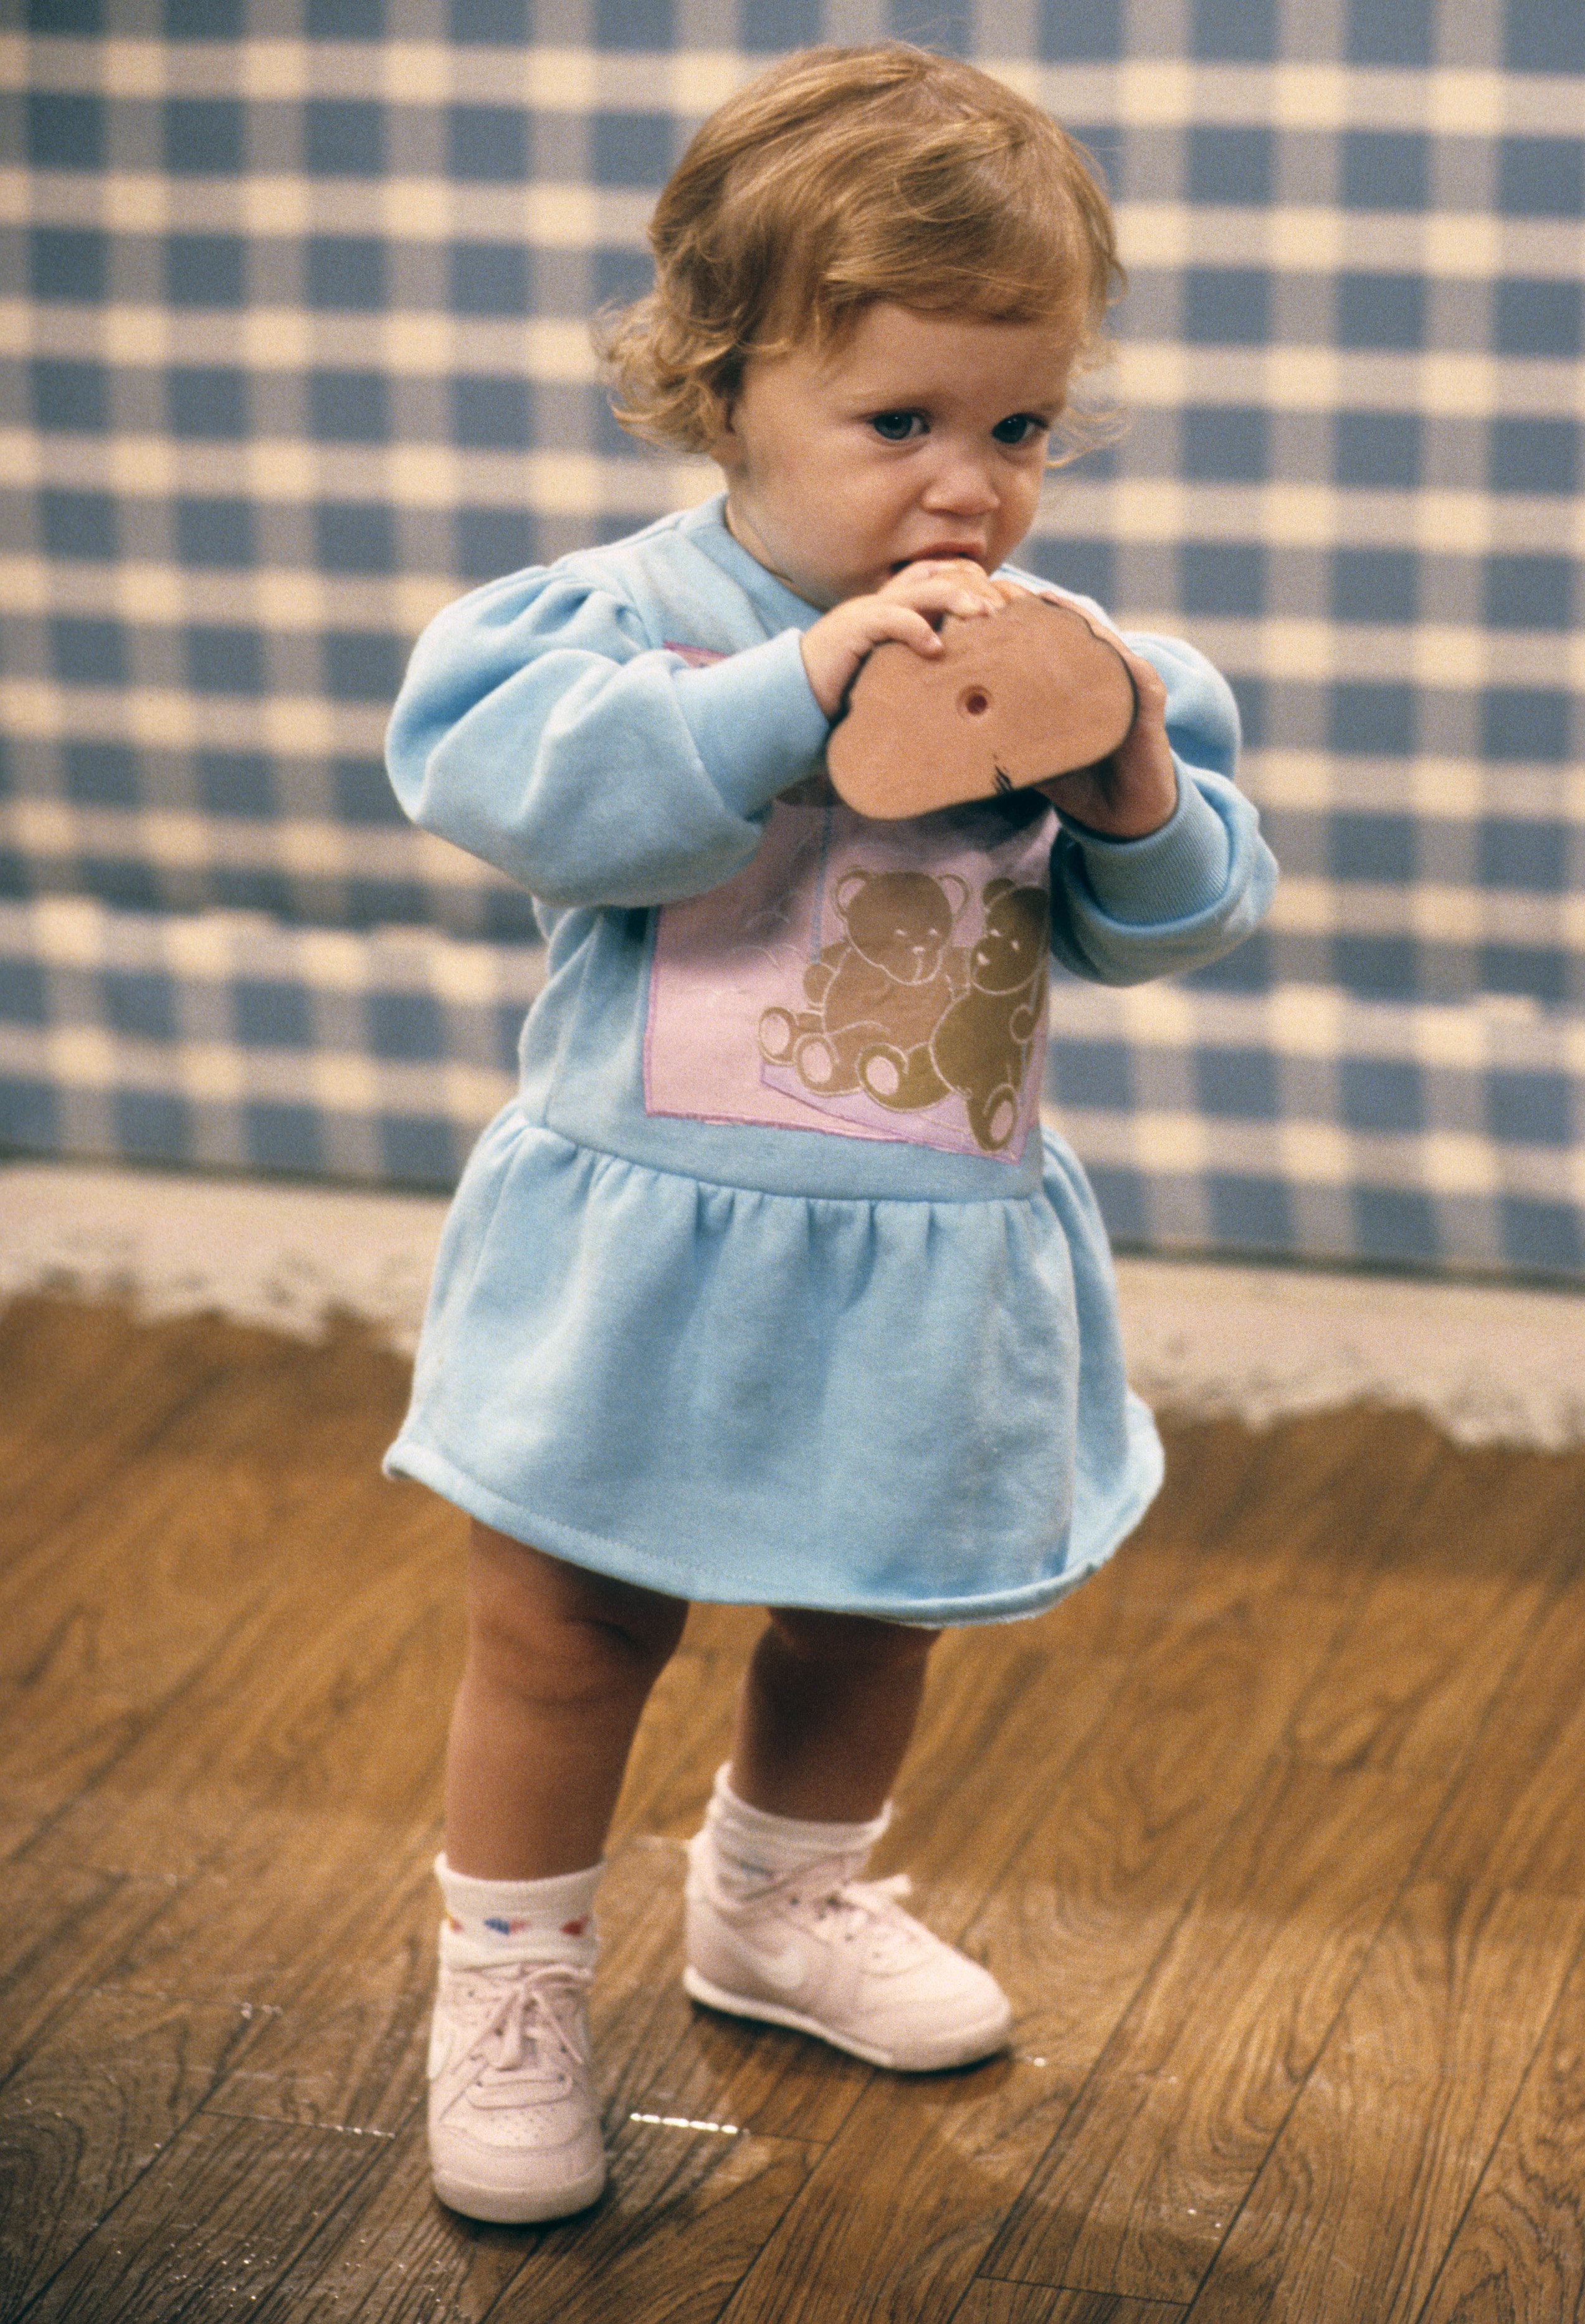 A November 1987 episode of "Full House" | Source: Getty Images